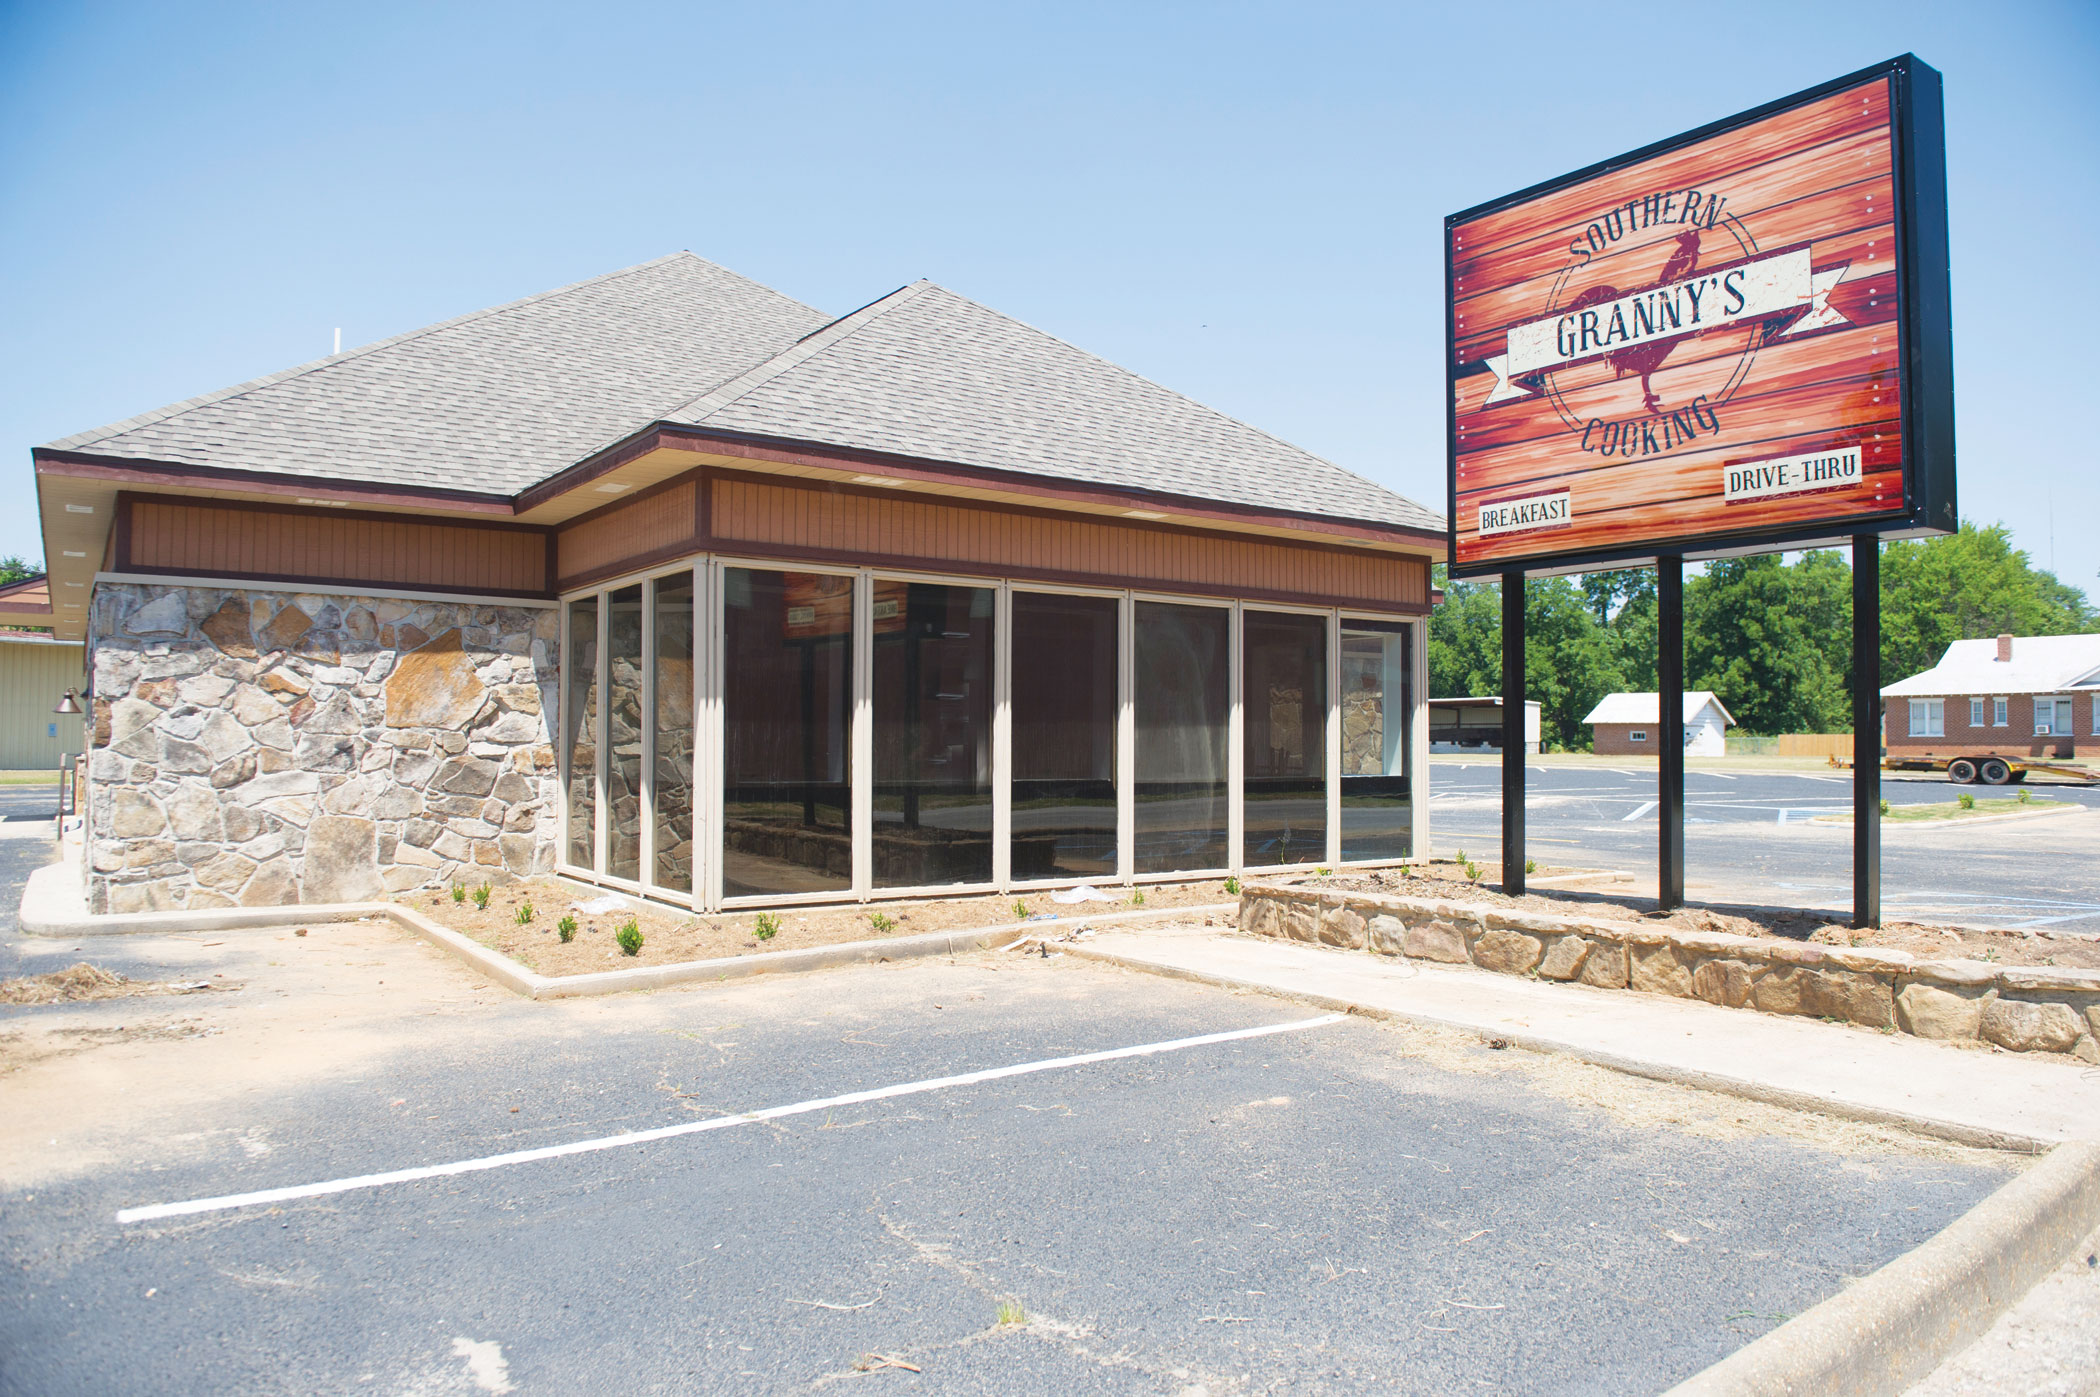 Granny’s Southern Cooking to open in former Tyler’s Restaurant building